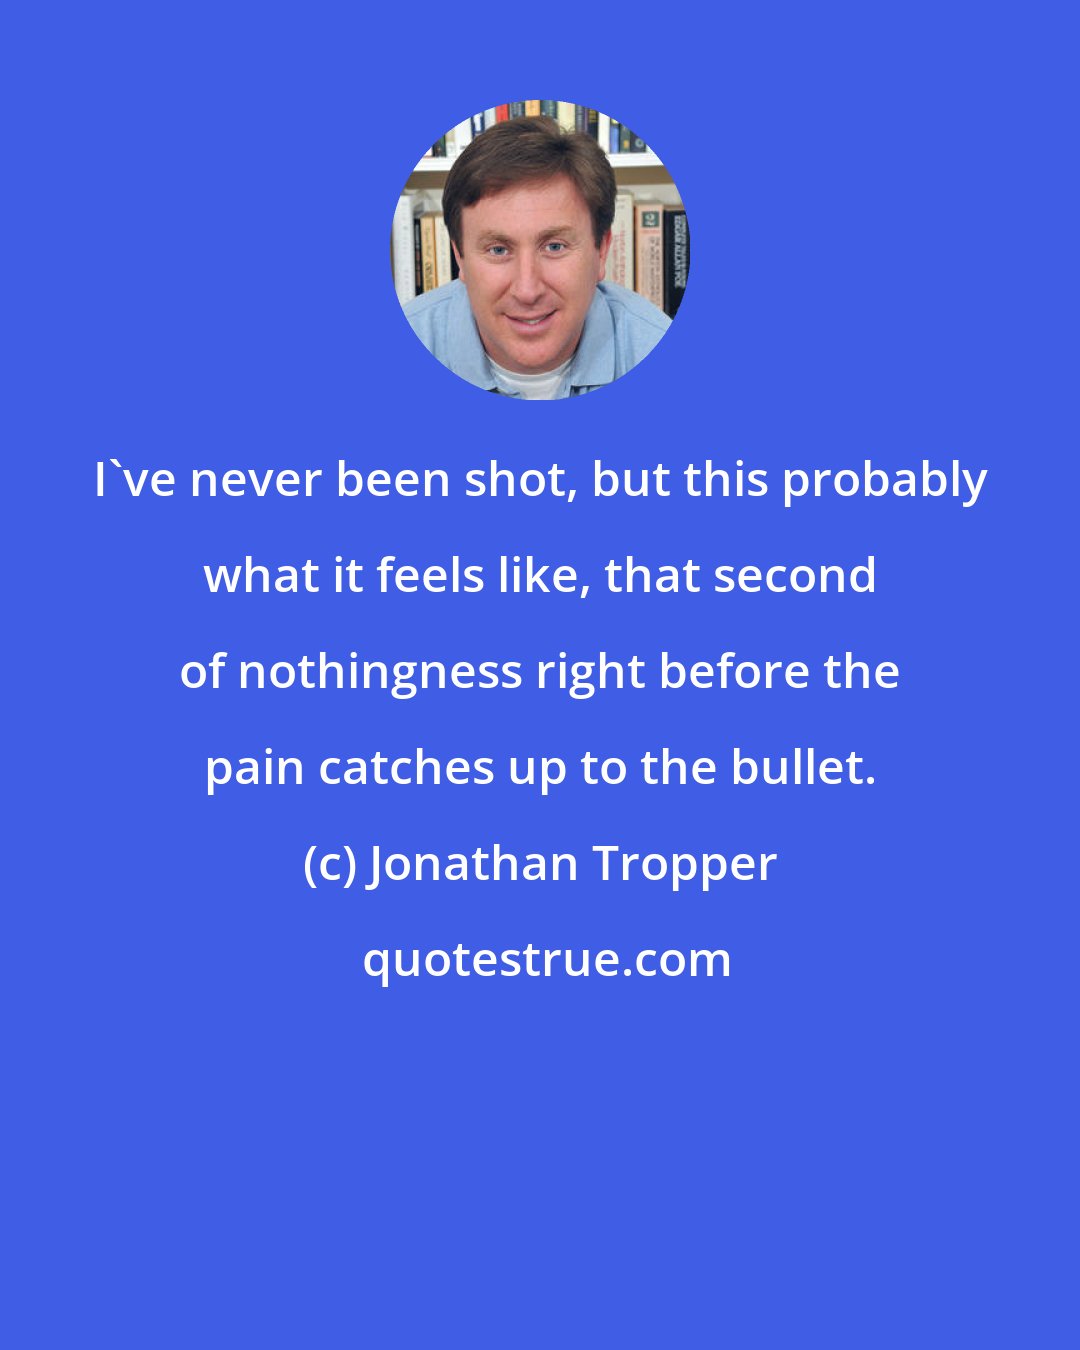 Jonathan Tropper: I've never been shot, but this probably what it feels like, that second of nothingness right before the pain catches up to the bullet.